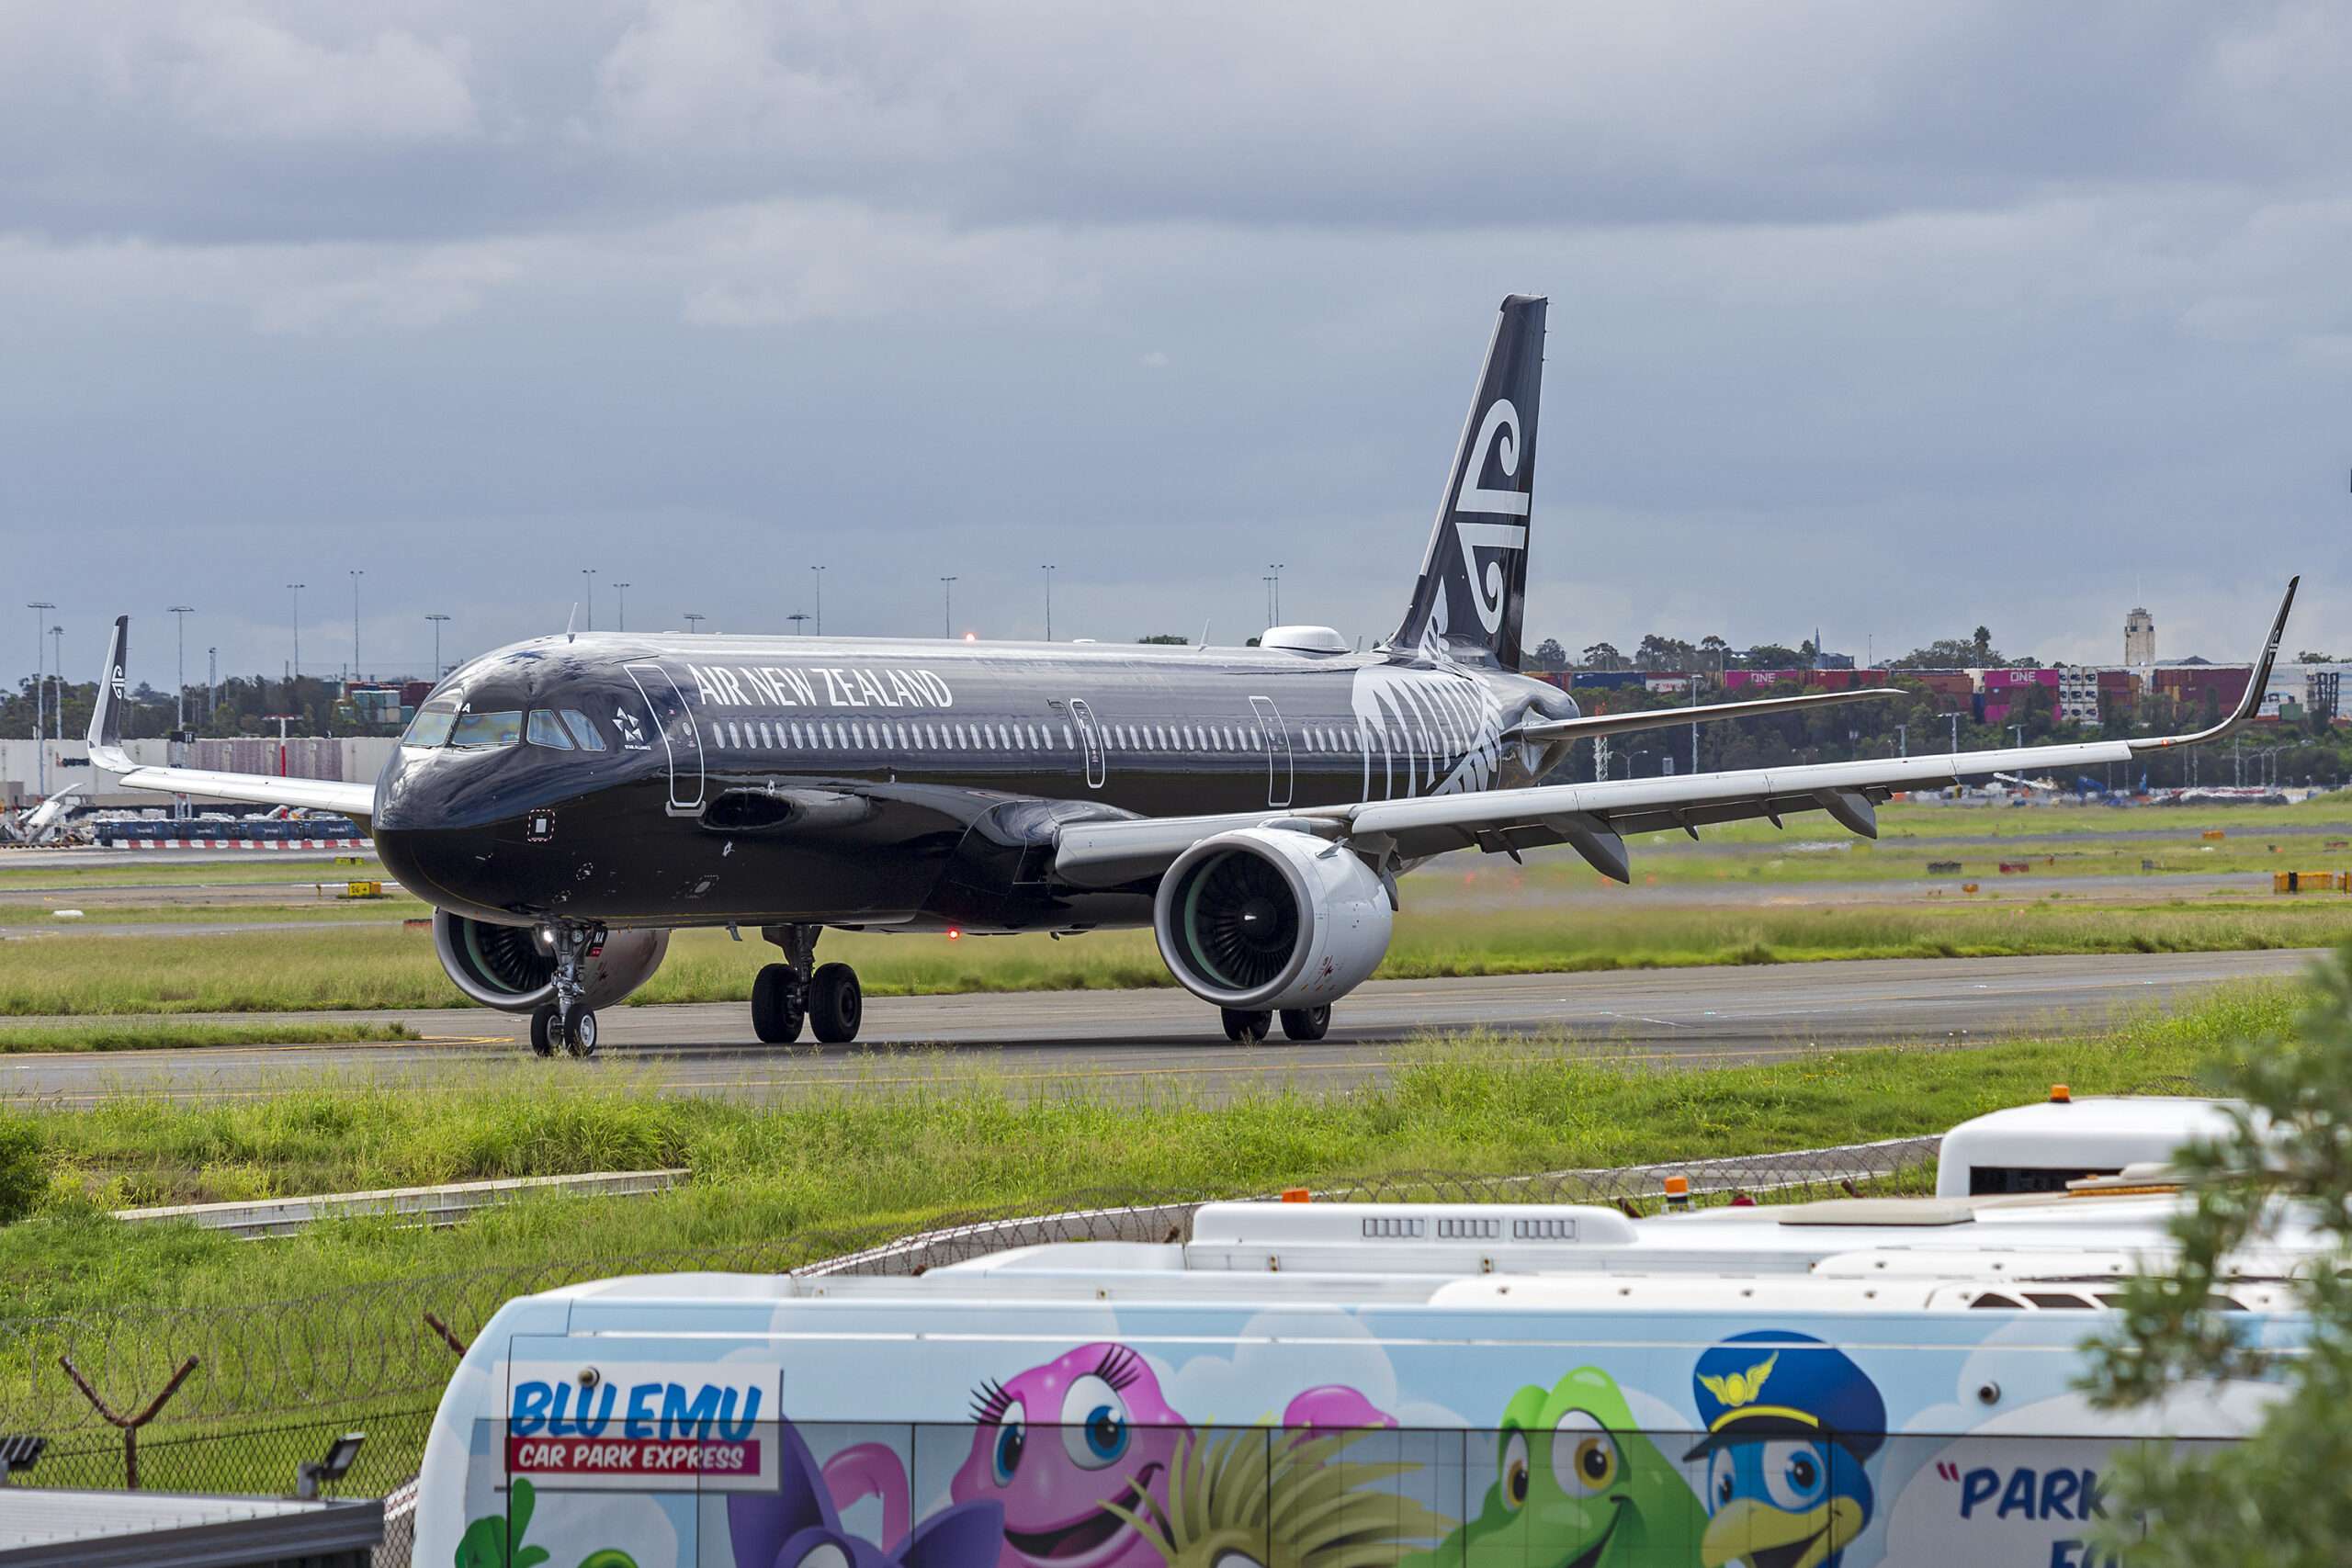 Where Does Air New Zealand Fly To? A Look at the Auckland Airline’s Presence